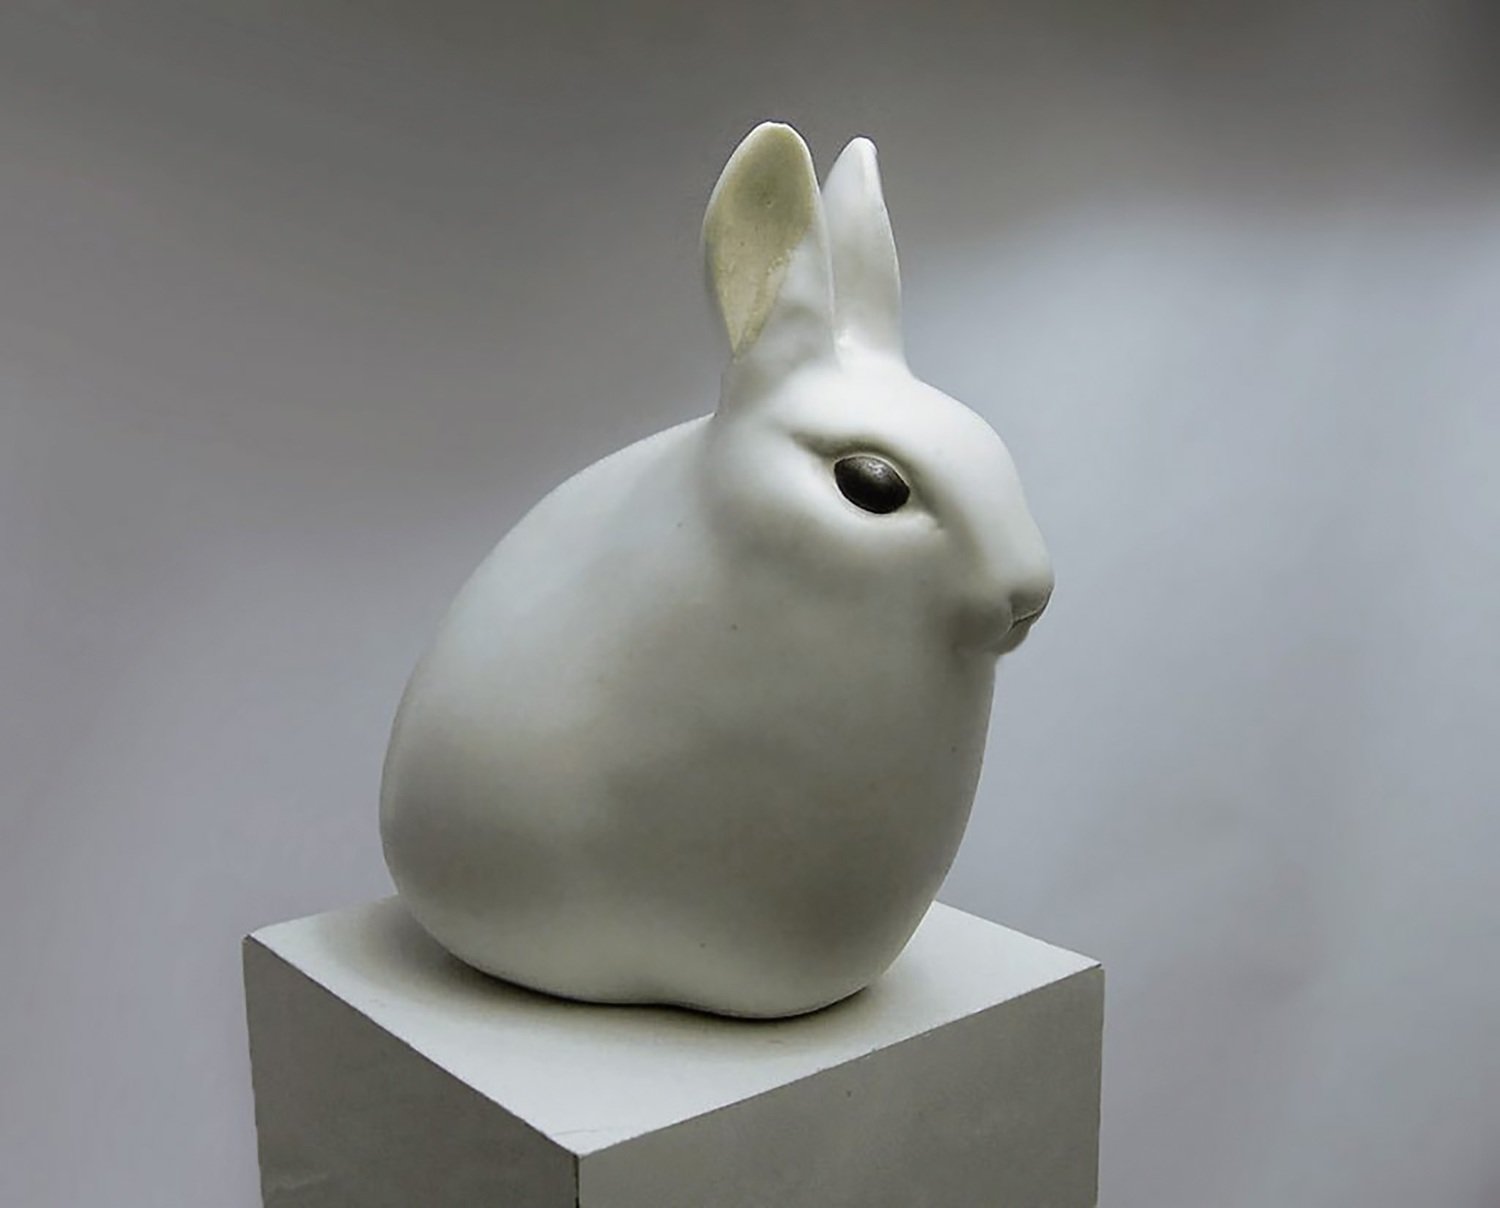 Ceramic Hare with Ears Up, white